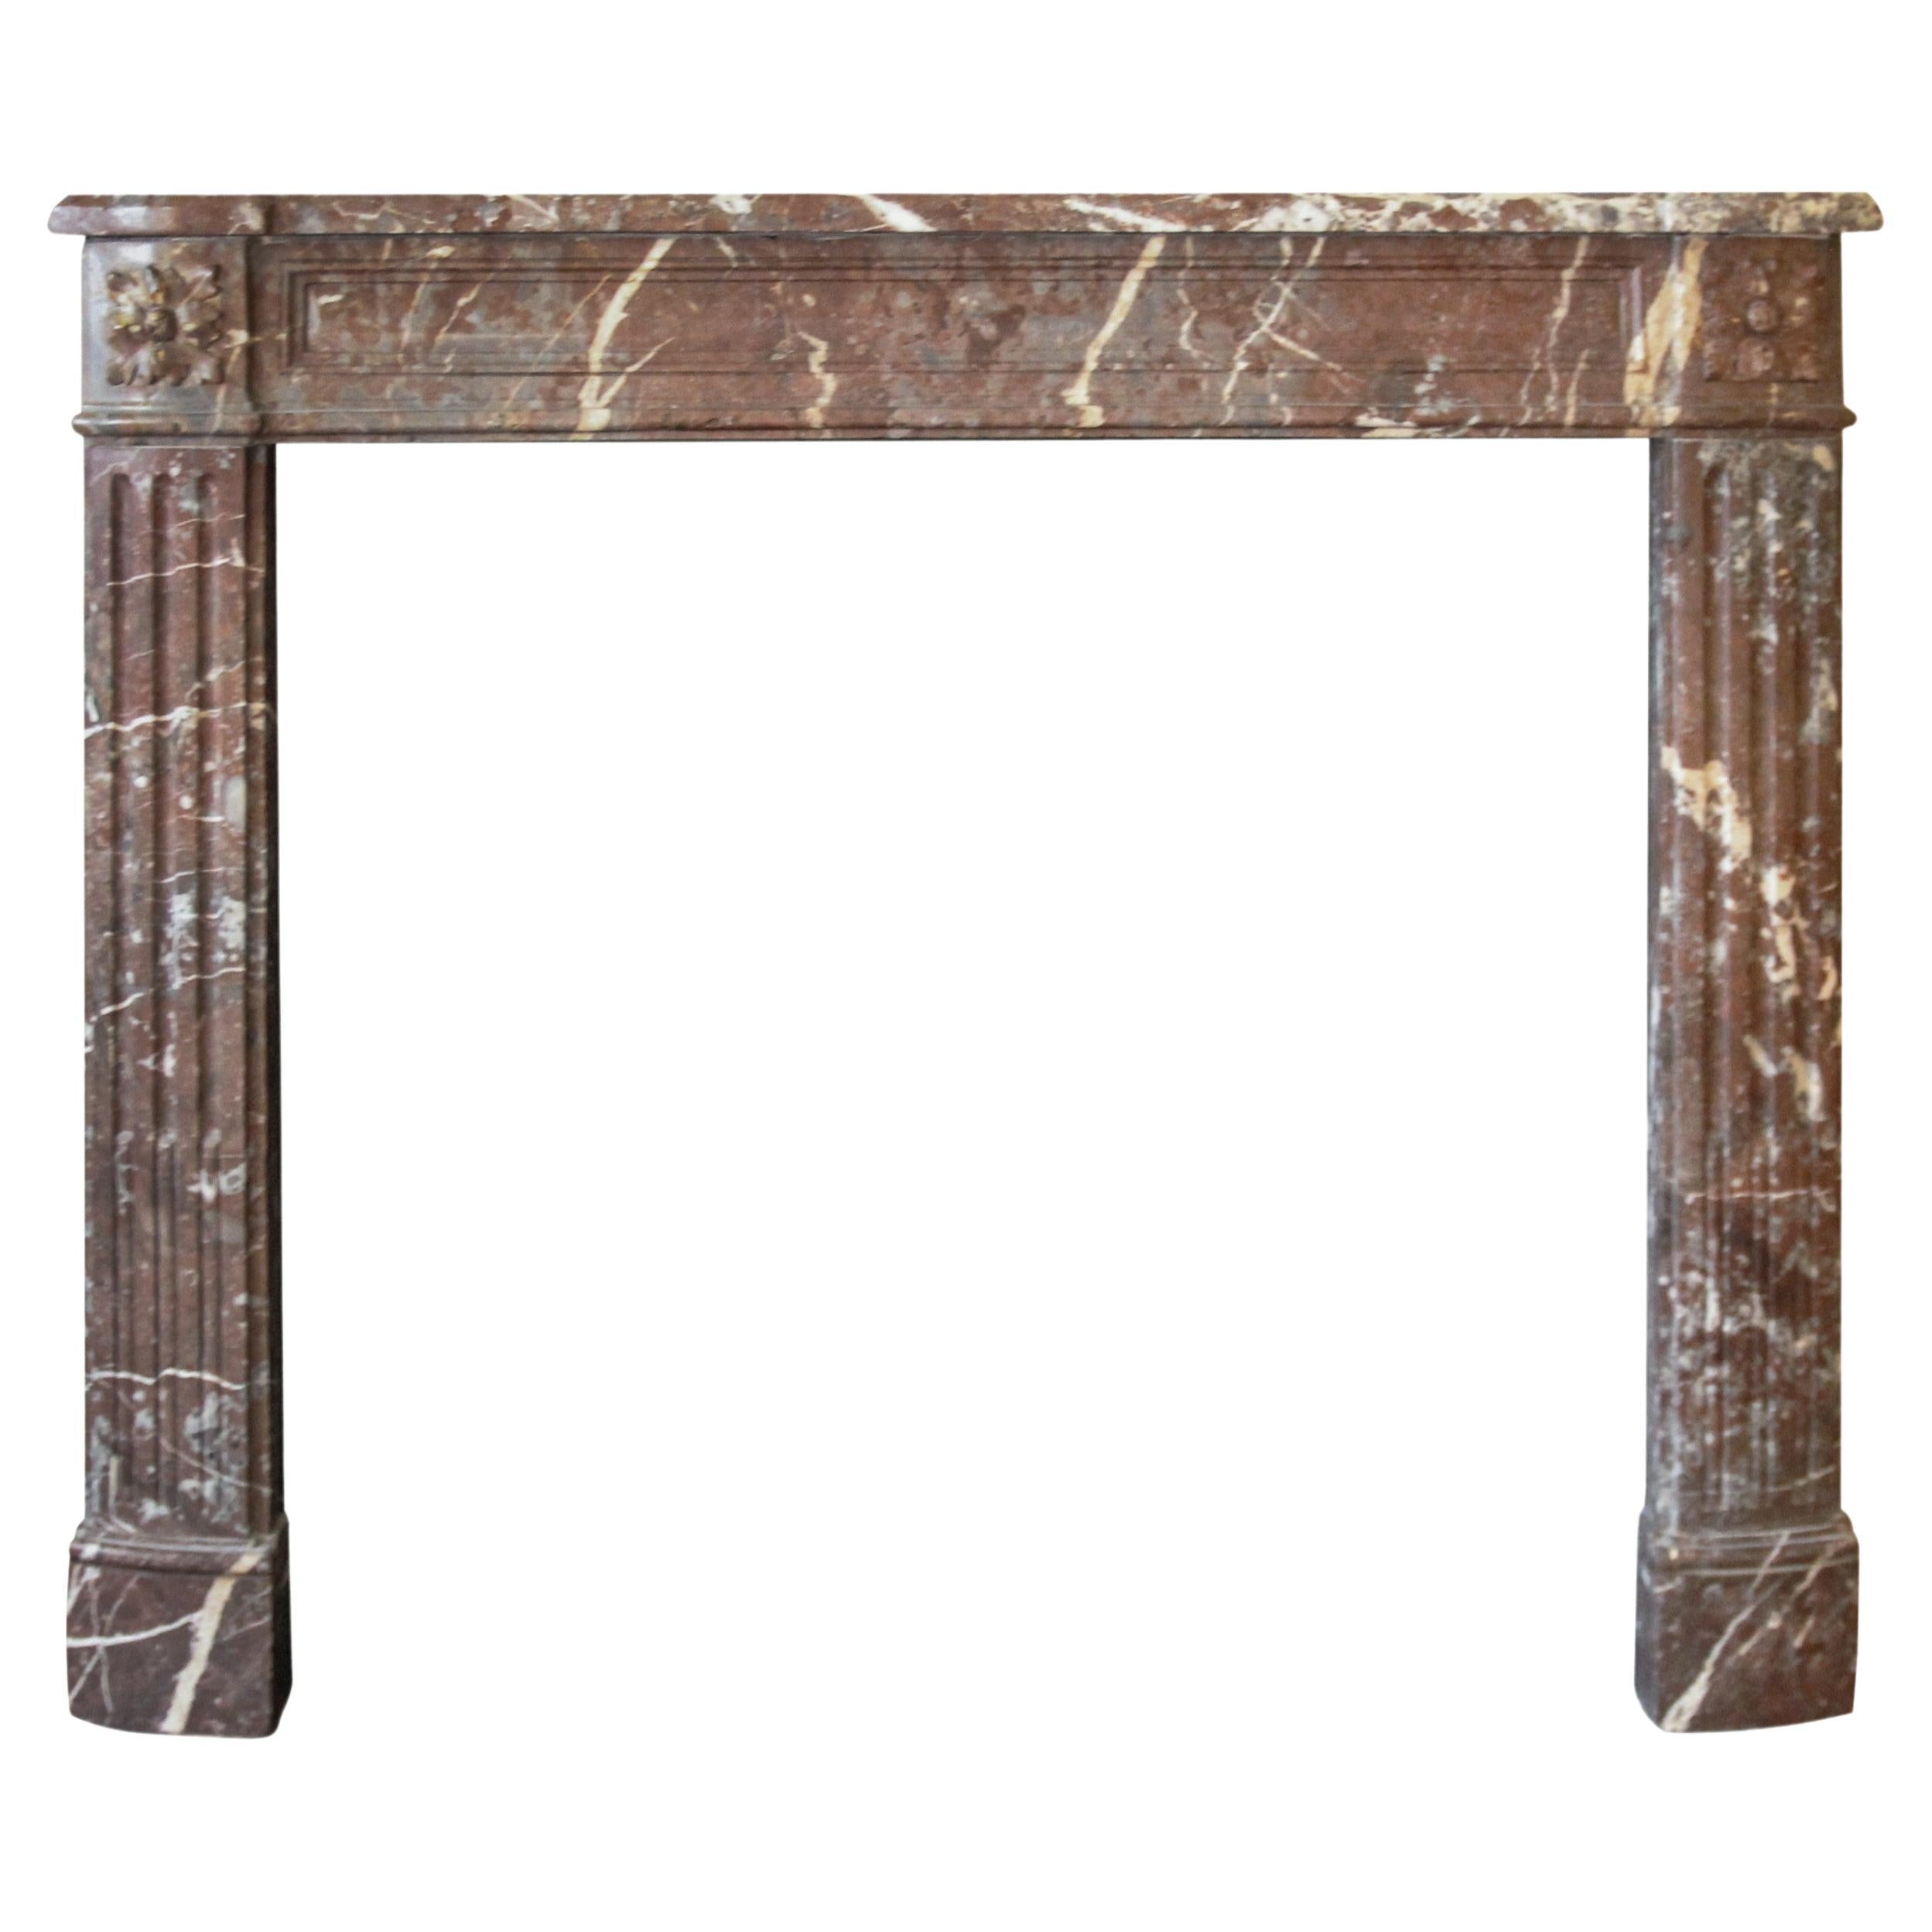 Waldorf Astoria Hotel Regency Louis XVI Marble Mantel Rouge Royal French For Sale